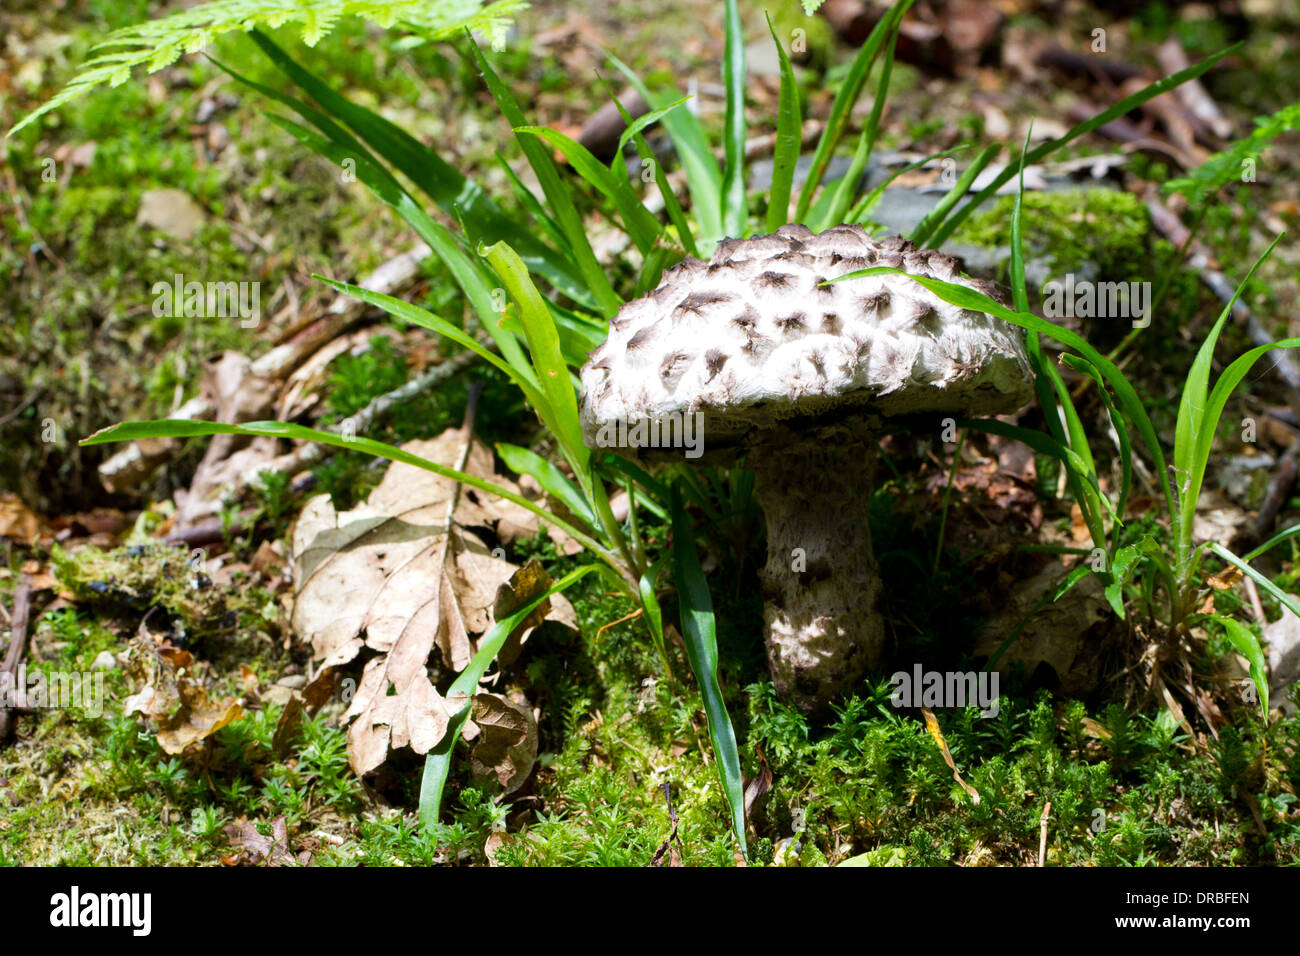 Old Man of the Woods fungus (Strobilomyces floccopus) fruiting body. Herefordshire, England. July. Stock Photo